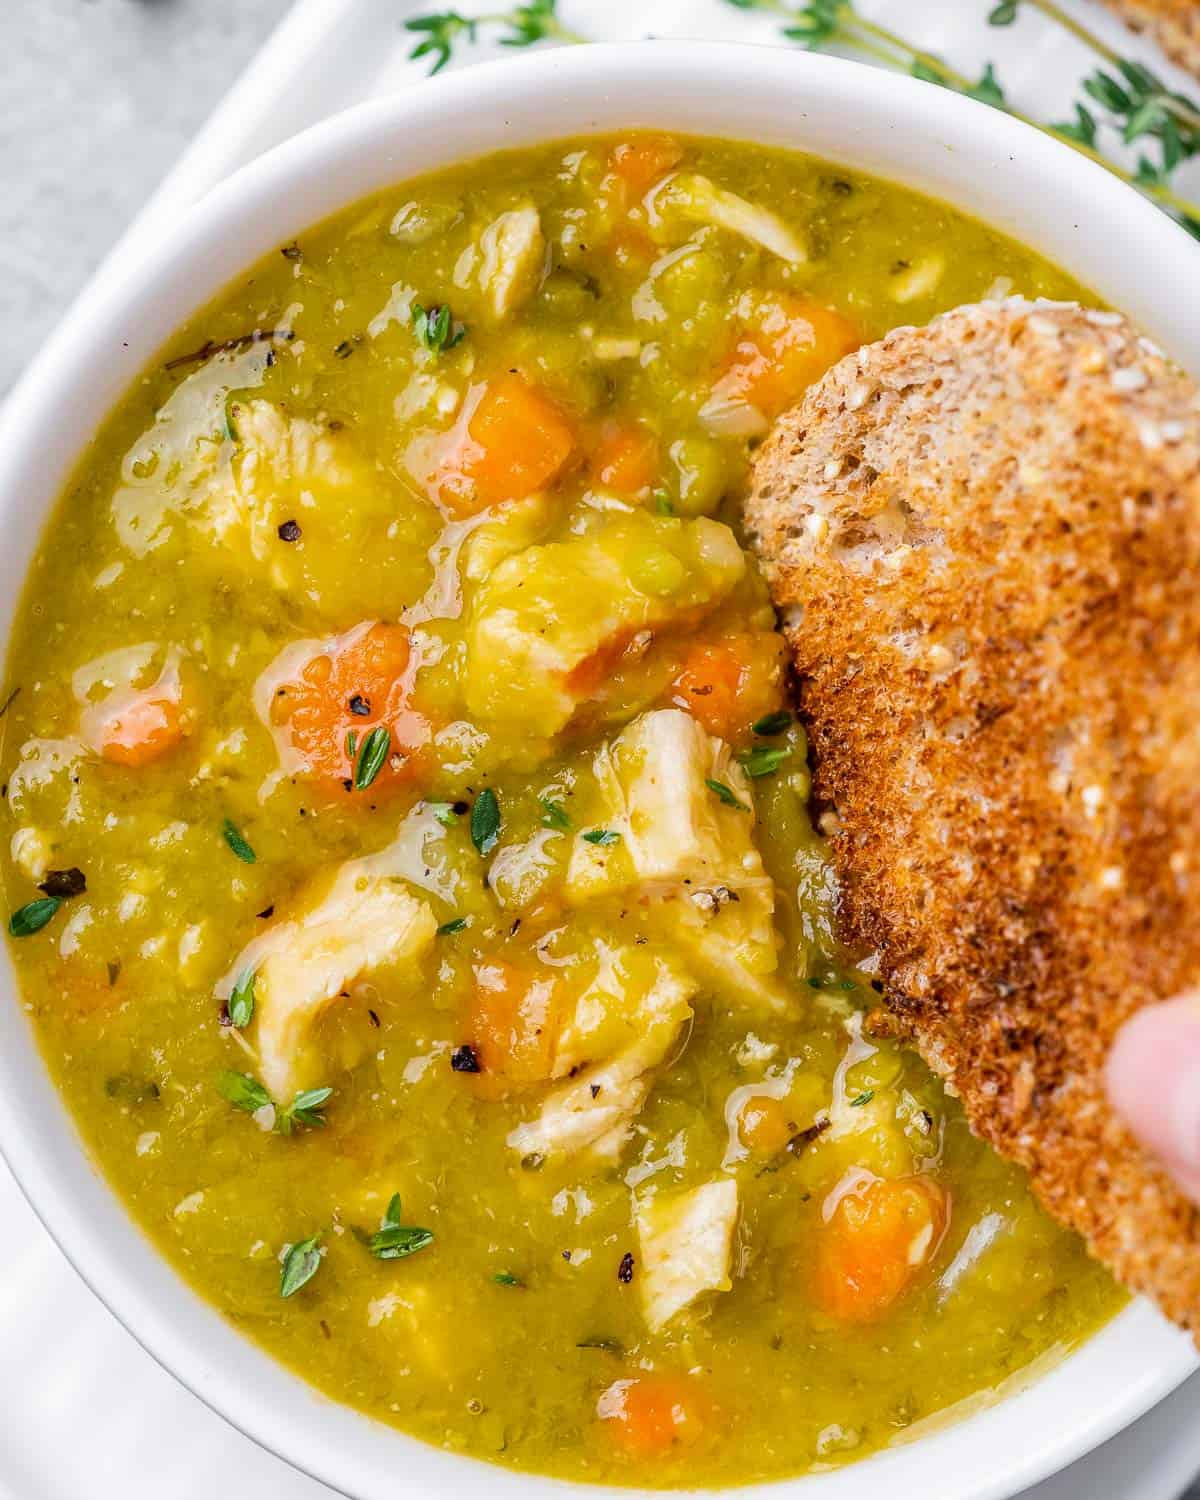 Dipping toast into a bowl of split pea soup.